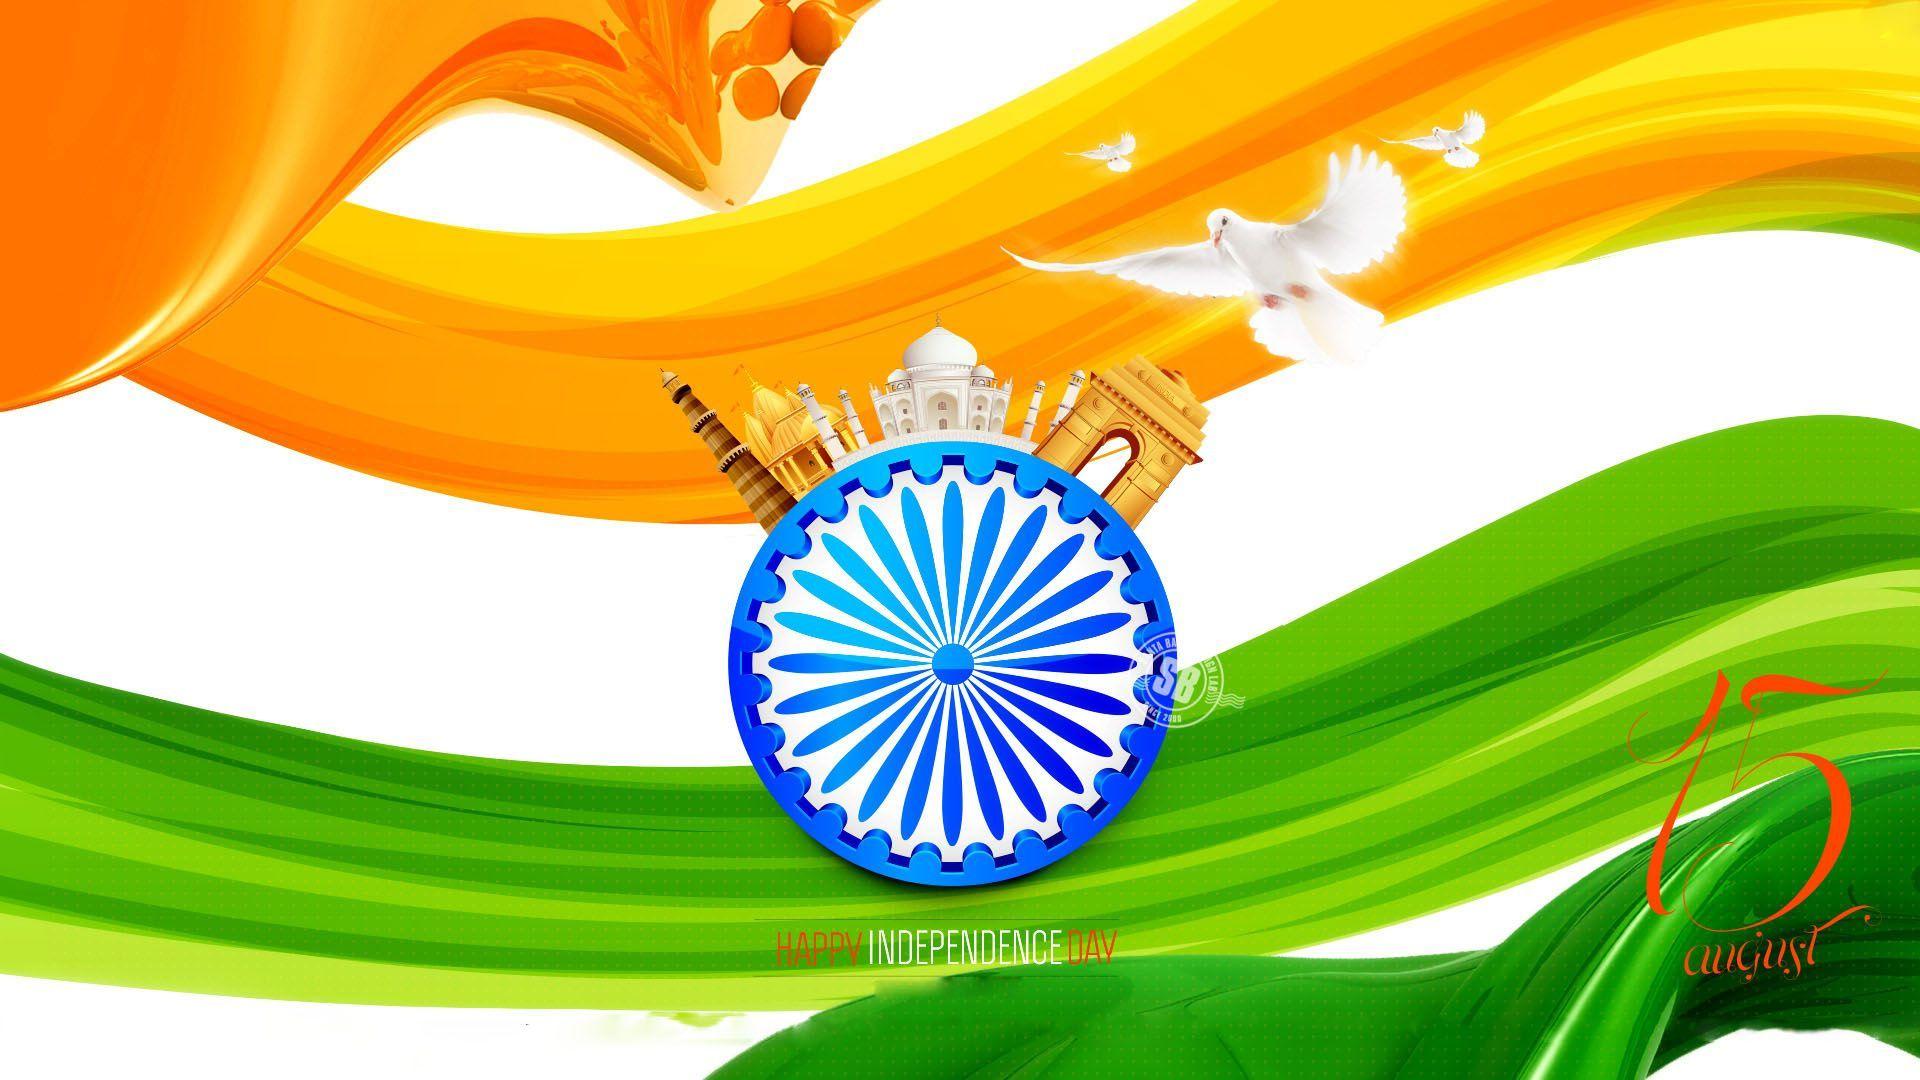 India Flag on Wood Texture Background Concept for 15 August Independence  Day Wallpaper, Happy 26 January Republic Day Banner Stock Photo - Image of  graphic, international: 123400288